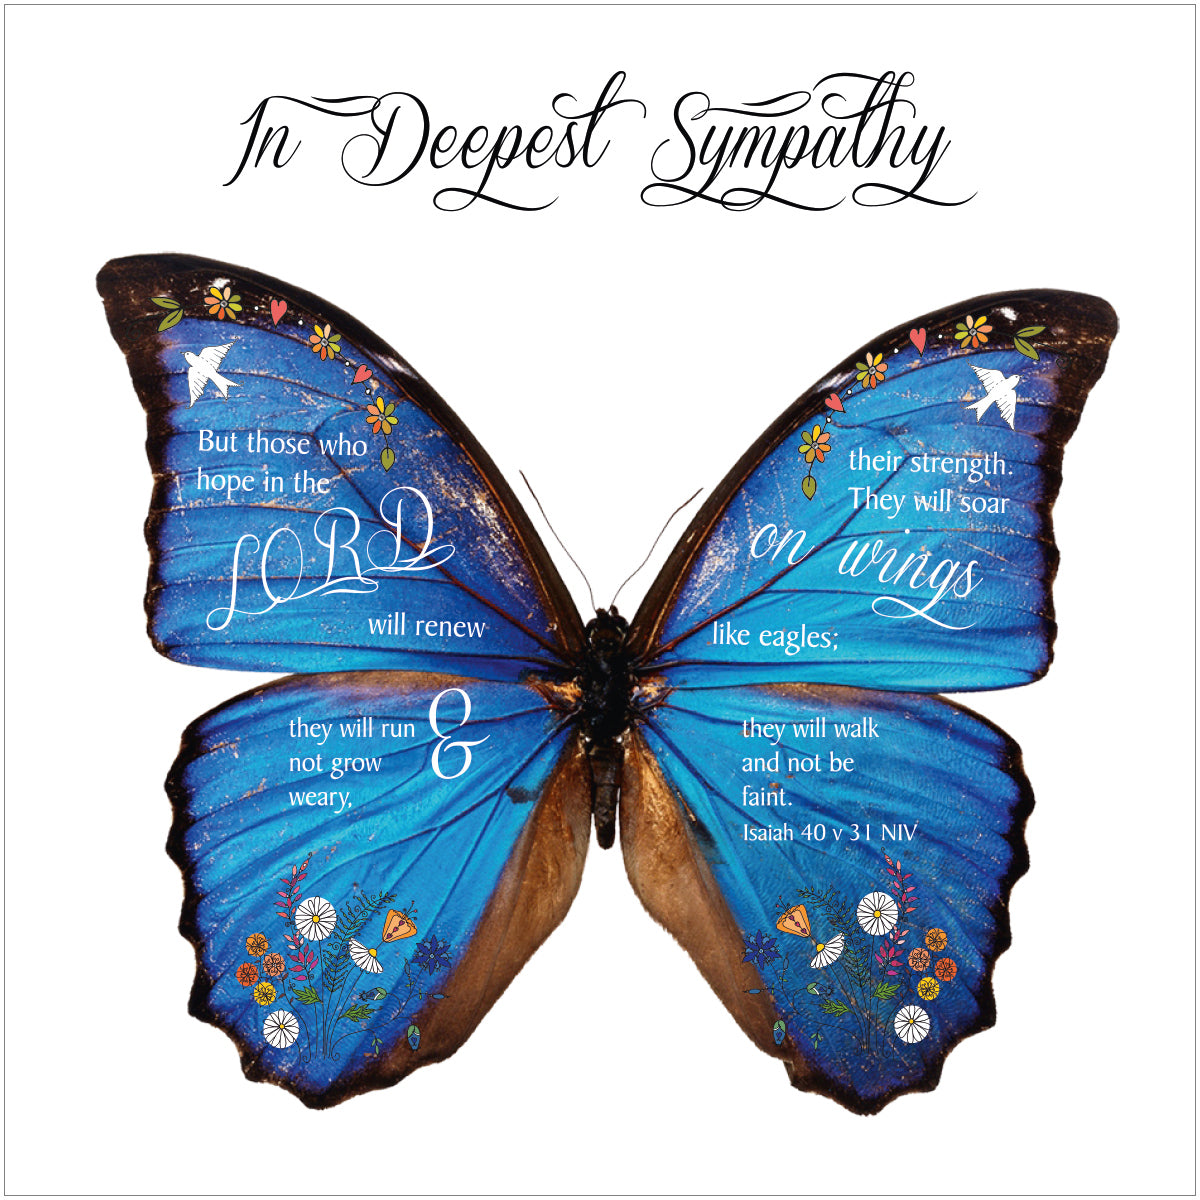 Sympathy Card - Butterfly/Isaiah 40:31 - The Christian Gift Company